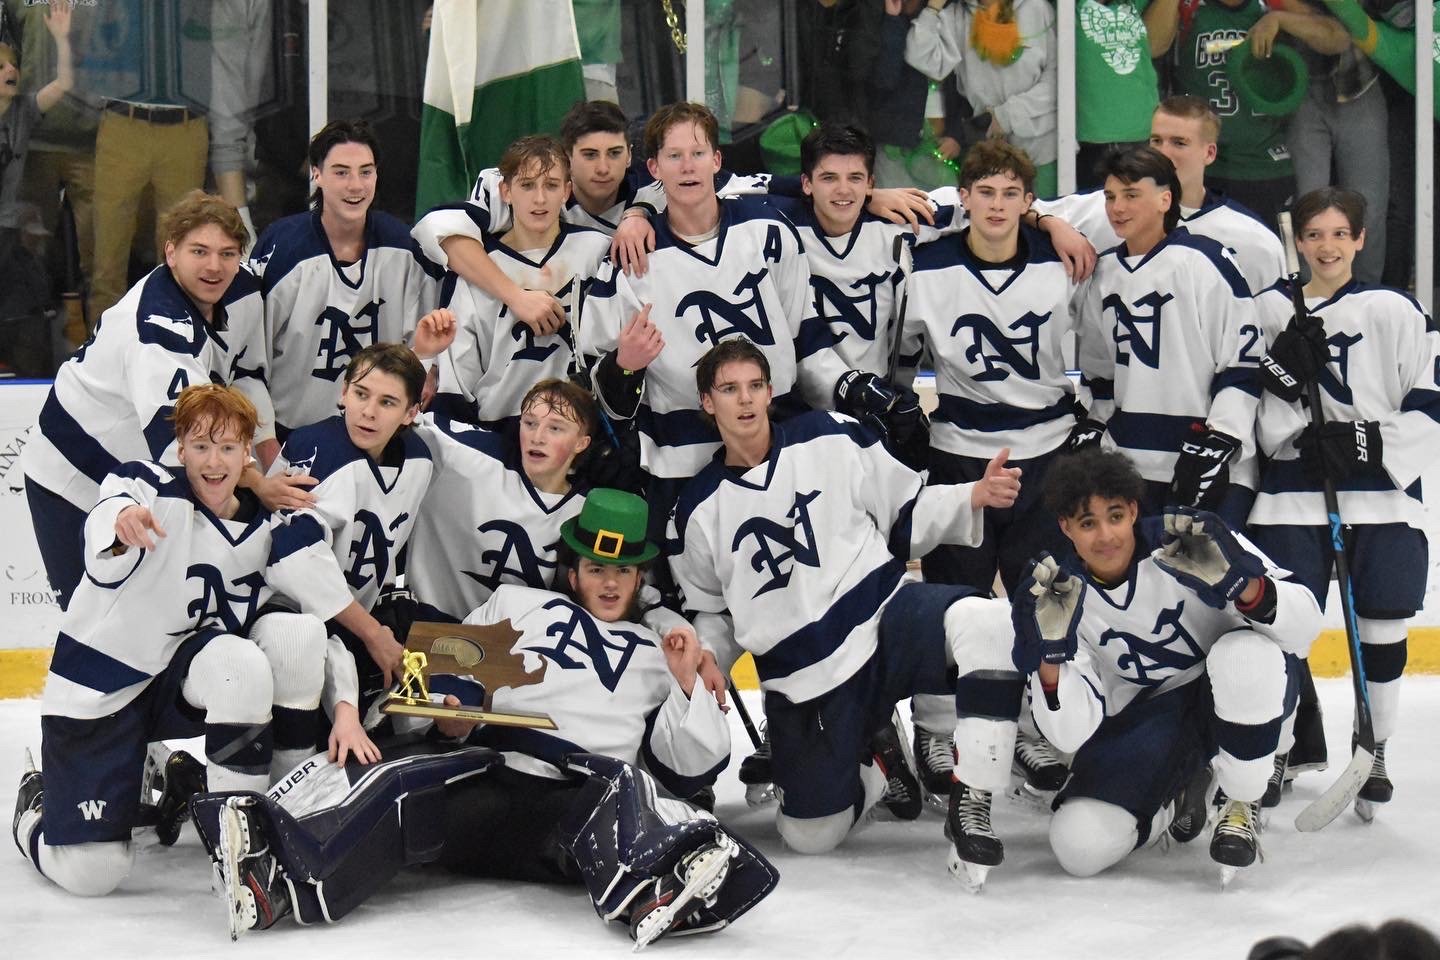 The Whalers celebrate after Thursday's 2-0 win over Abington. The victory clinched a spot in the Div. 4 semifinals, where Nantucket will challenge Sandwich on Saturday.